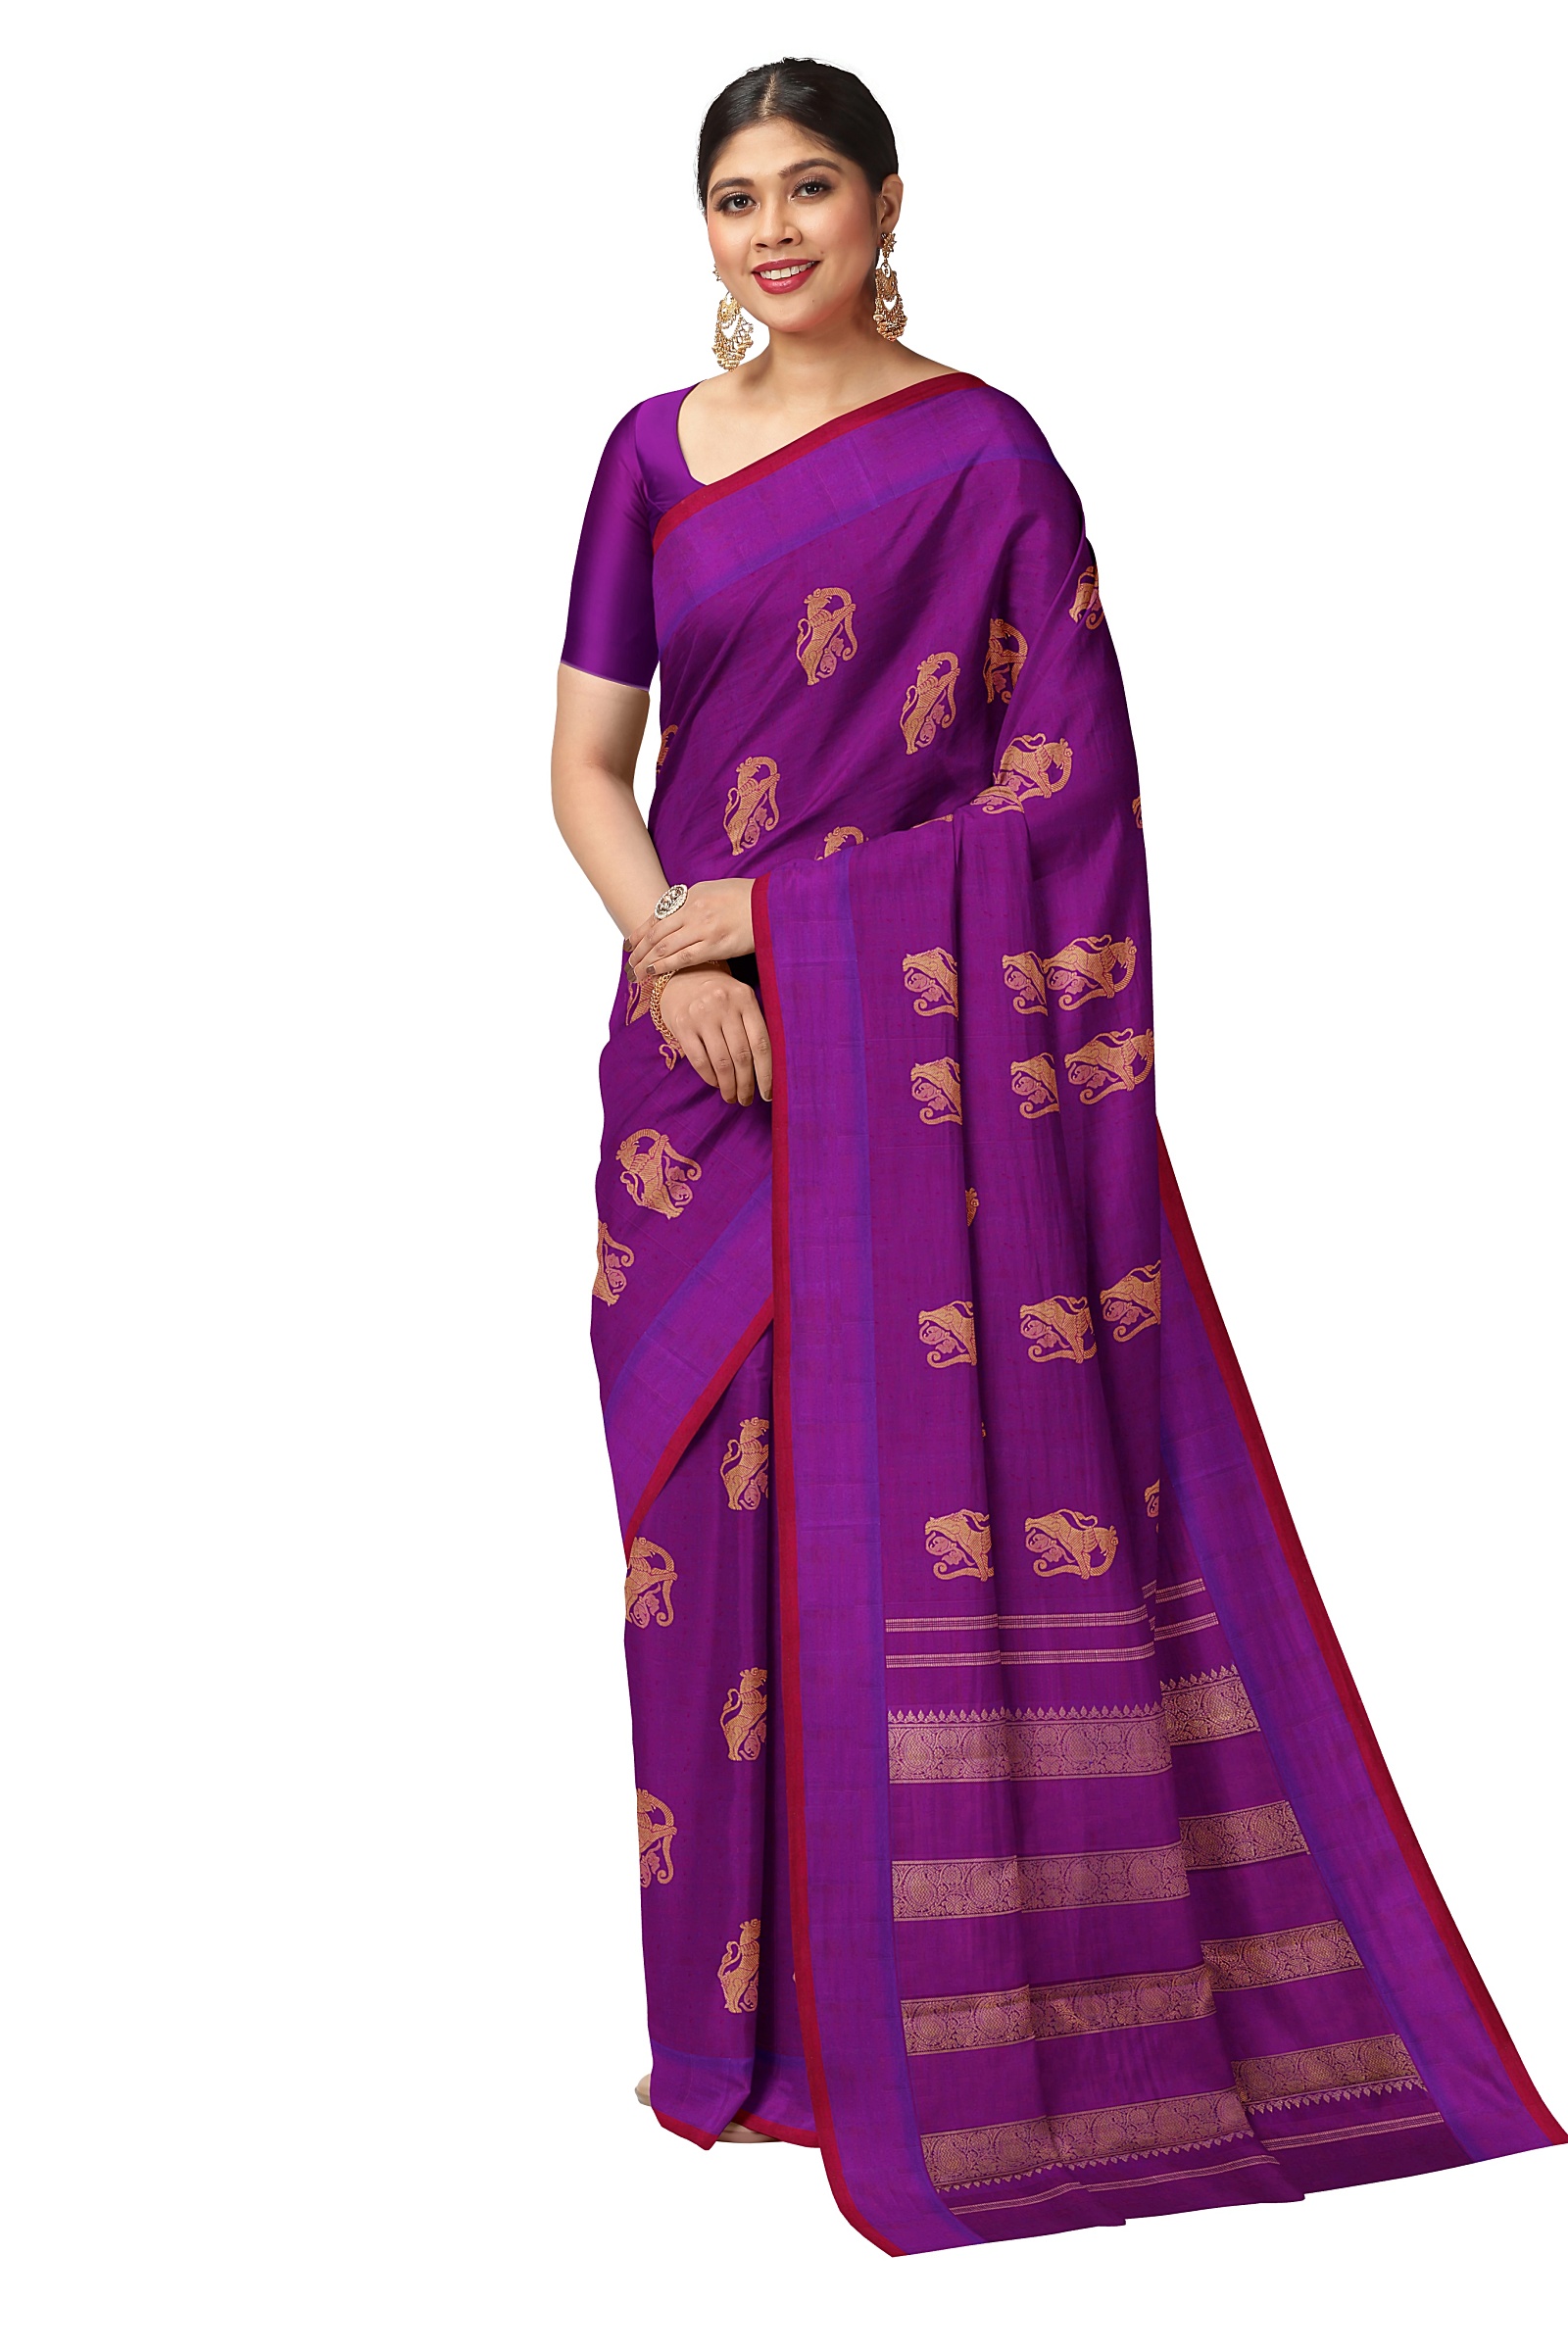 Co-optex Bangalore Handloom Fabrics Stores Sales Offers Numbers